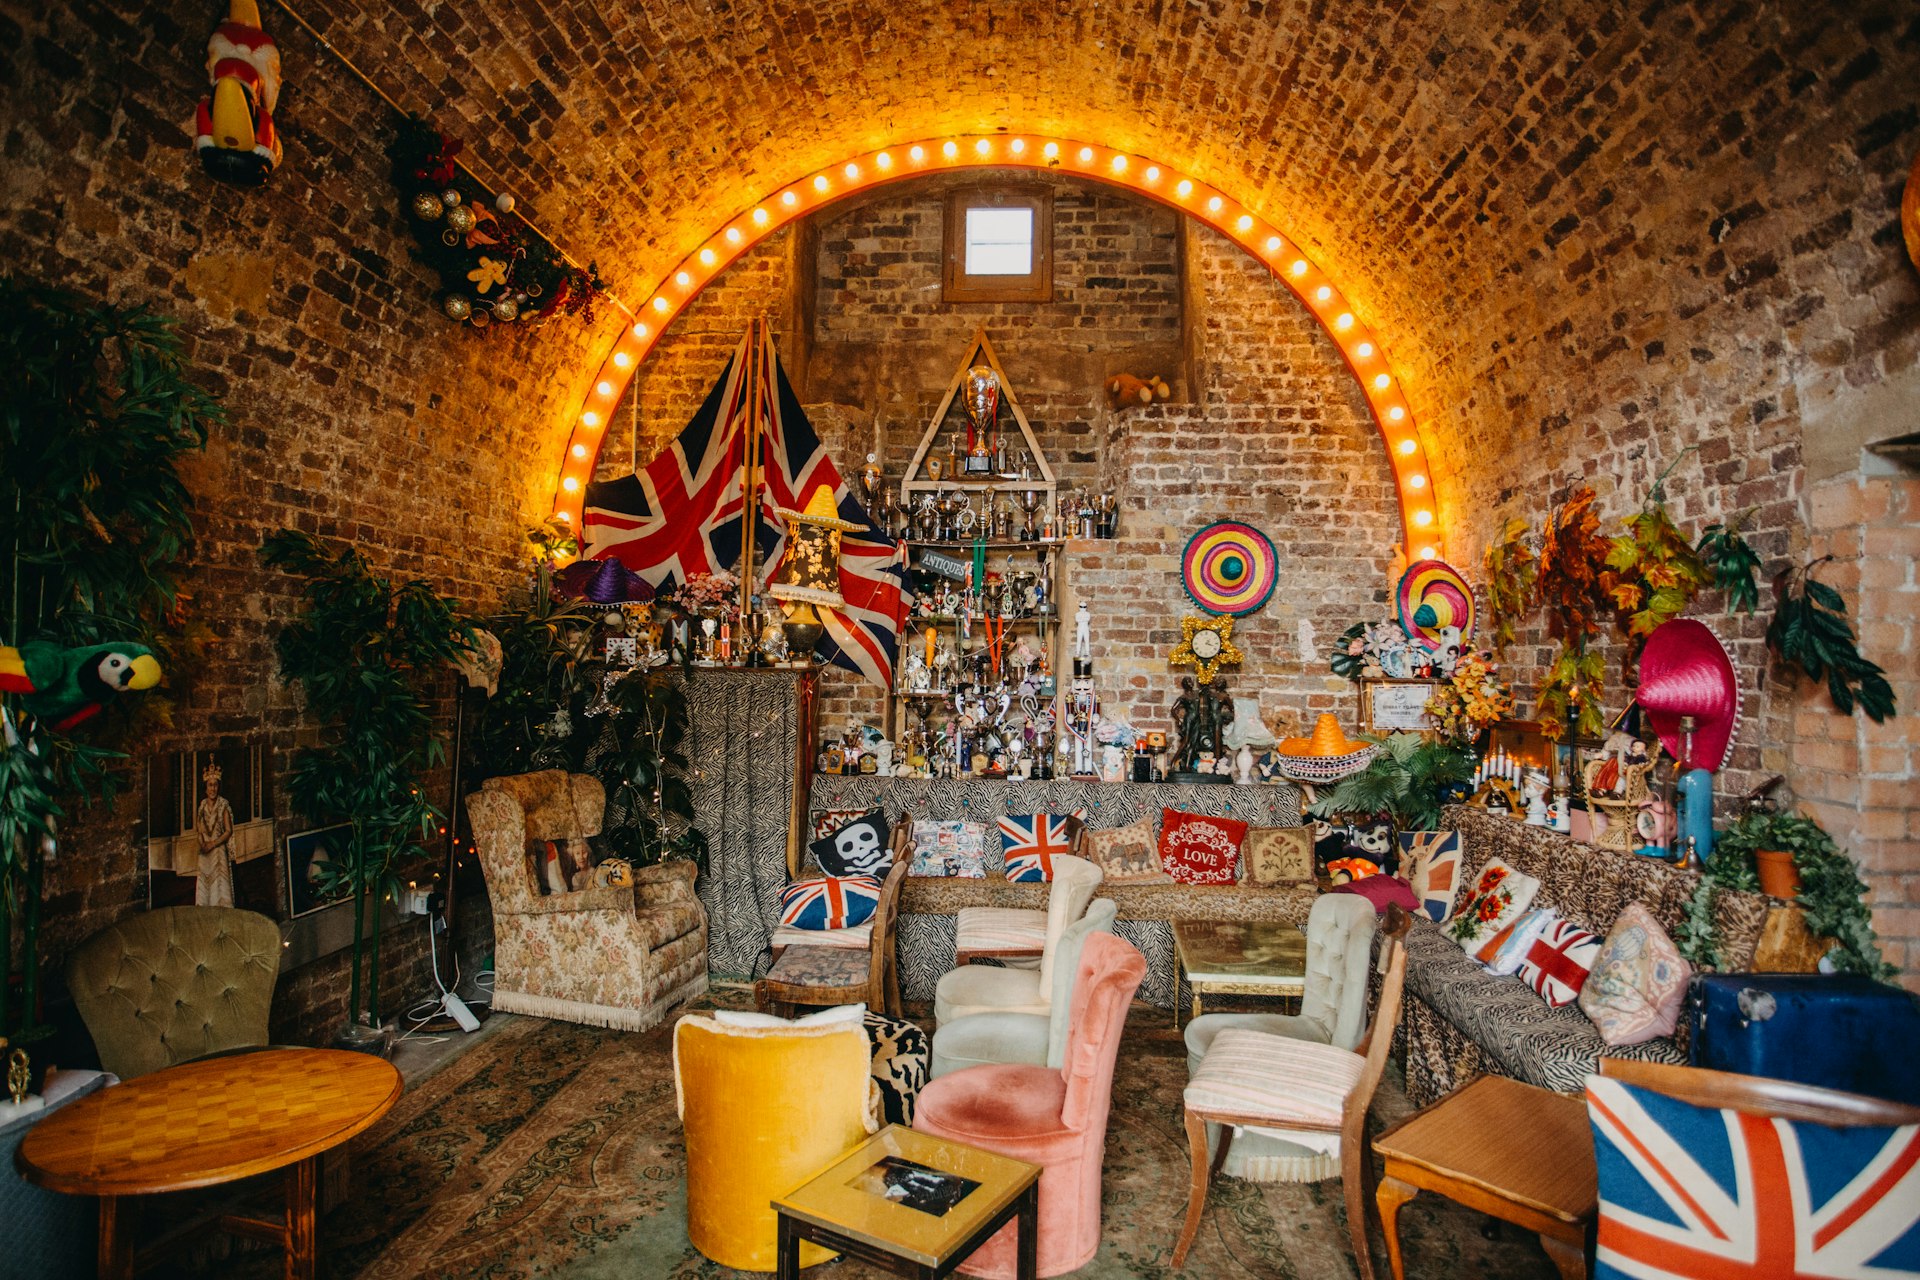 An eccentrically furnished space in a brick arch: it's stuffed with old-fashioned sofas, tables and chairs with flags, knick-knacks and sombreros lining the walls.